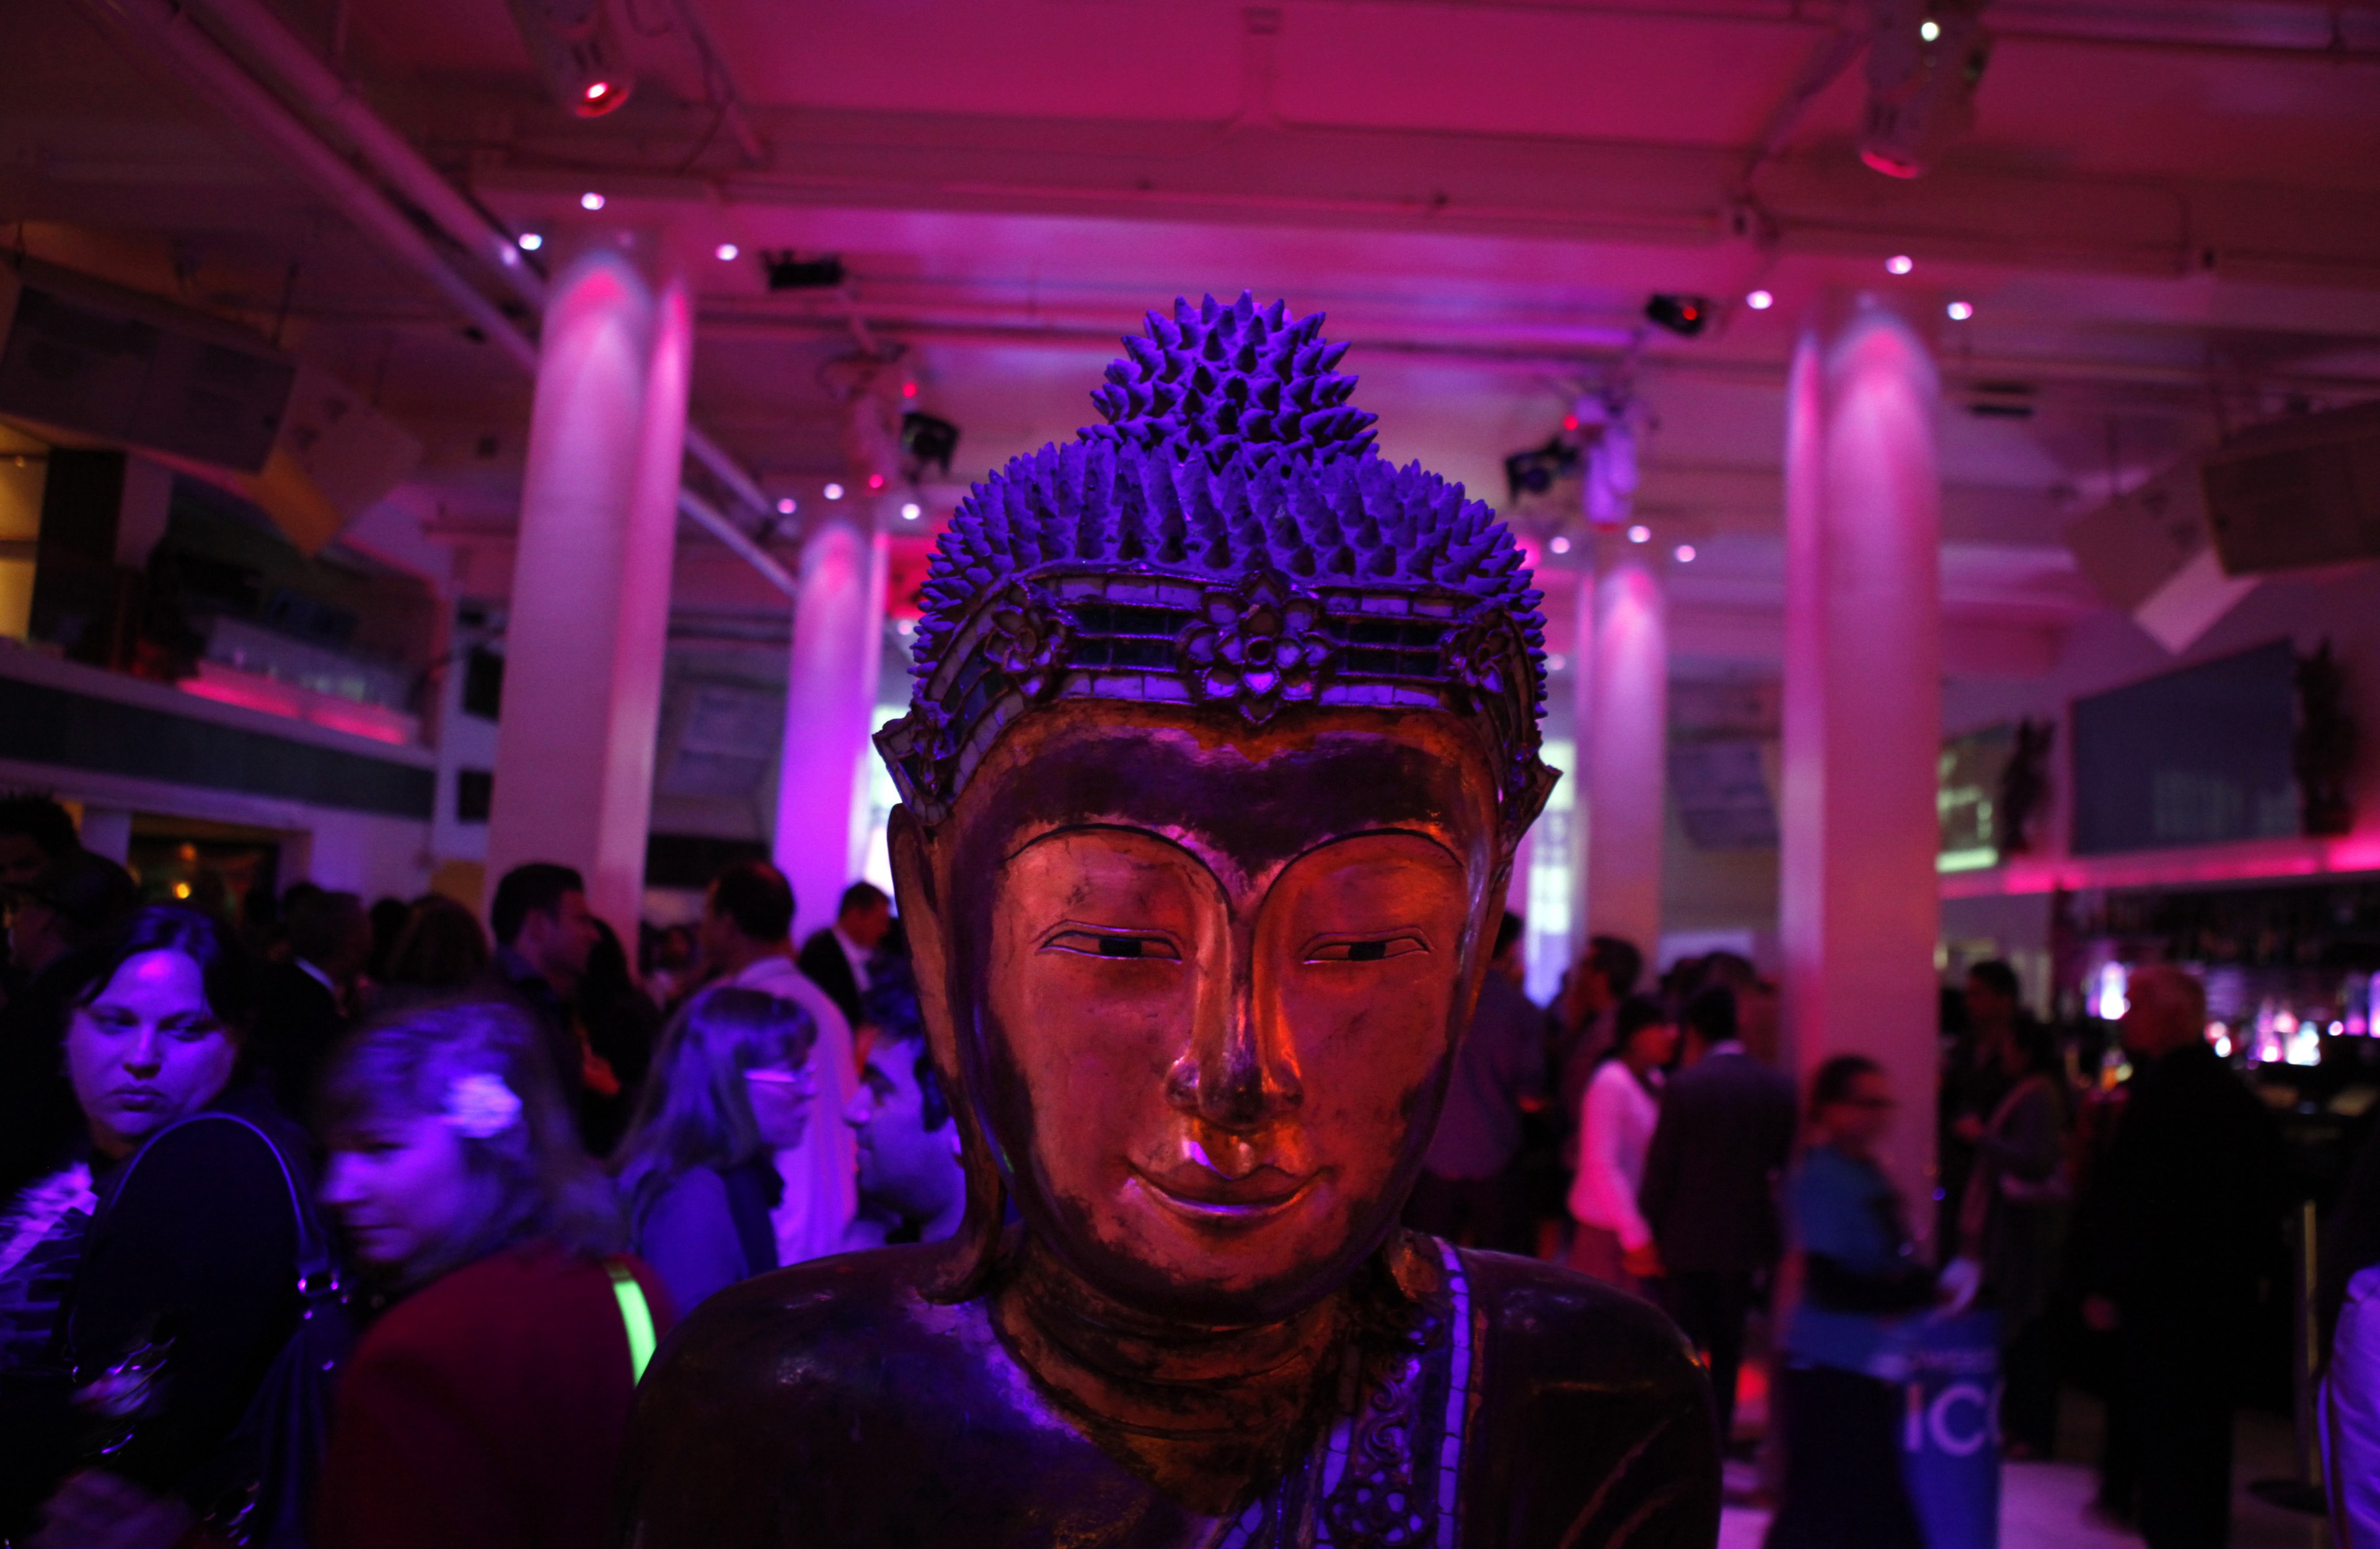 A Buddha statue is foregrounded against a lively party with purple lighting.